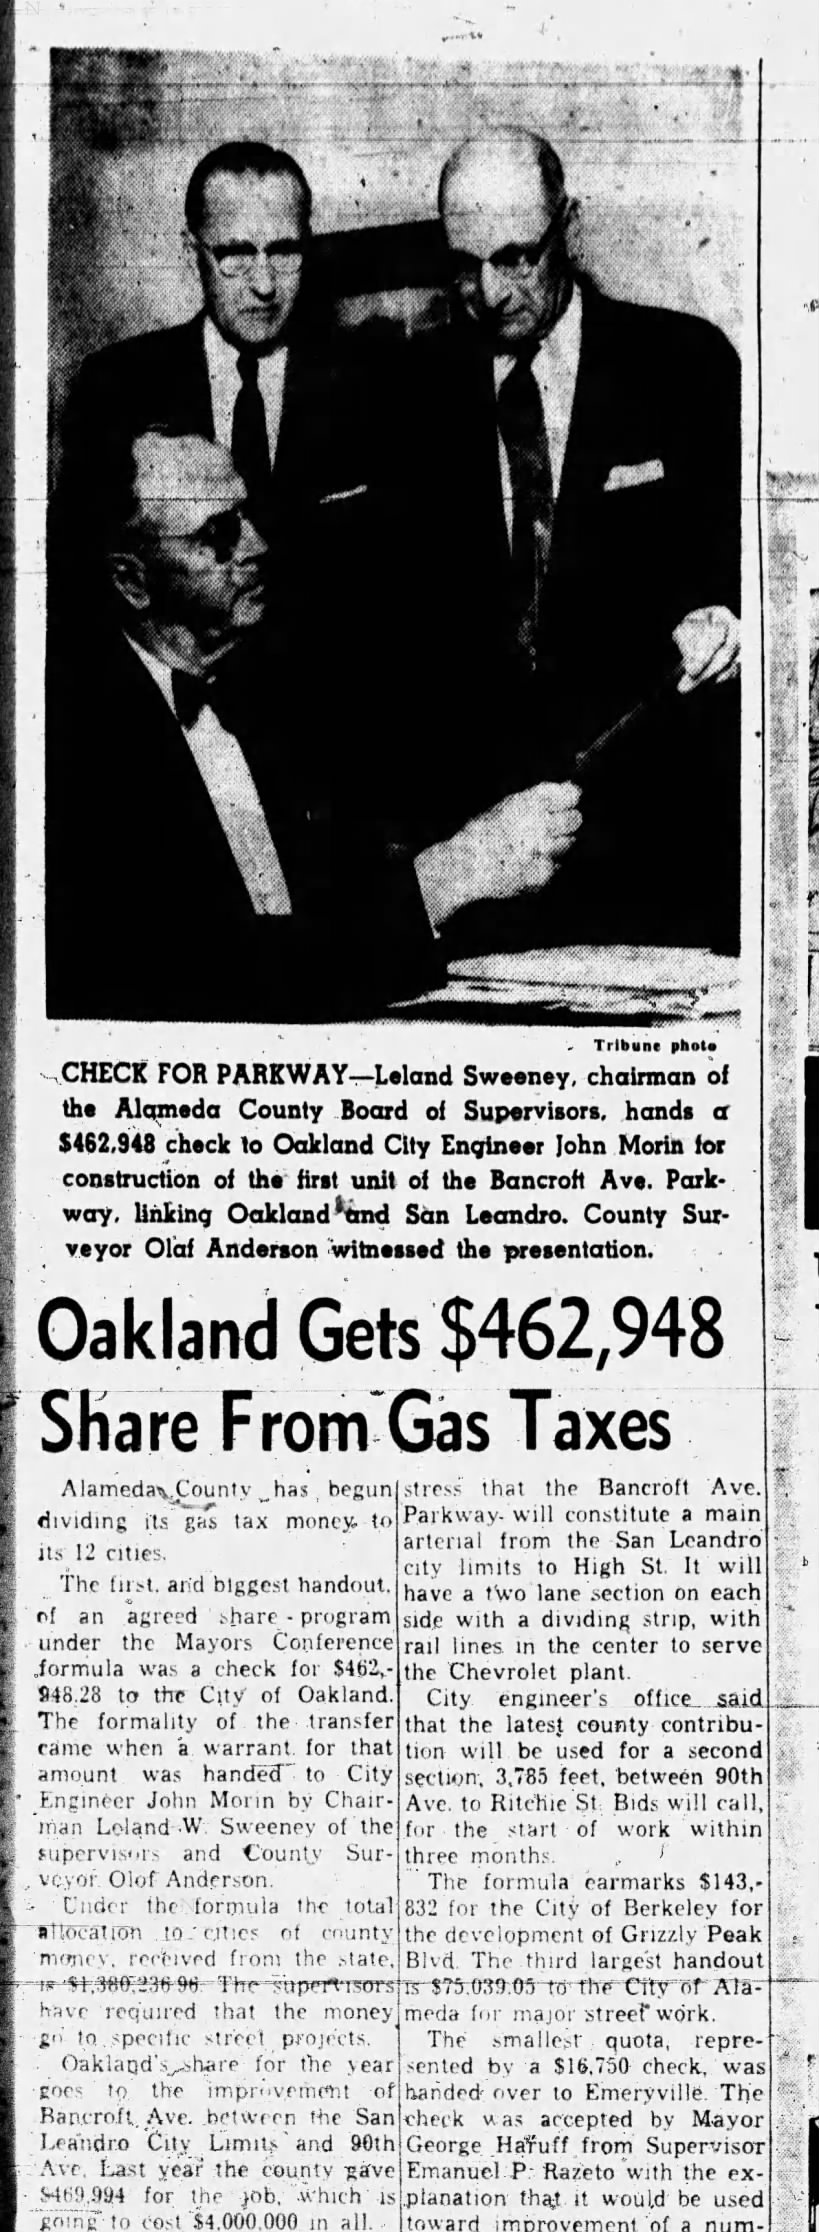 Oakland Gets $462,948 Share From Gas Taxes - January 16, 1957